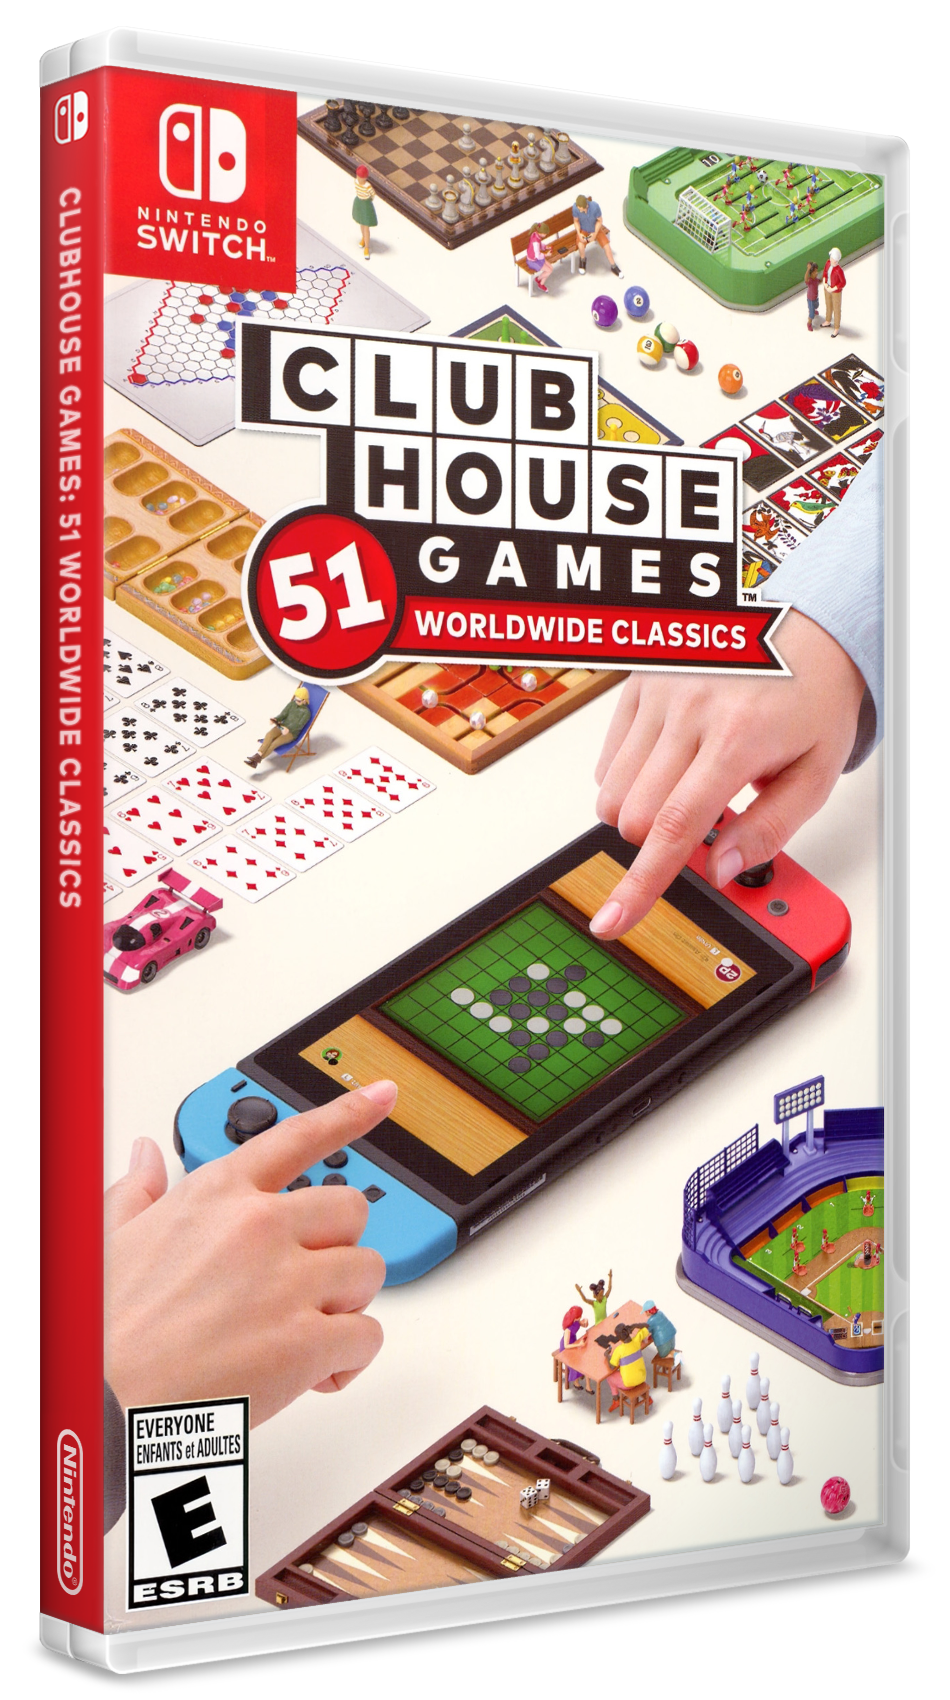 Clubhouse Games: 51 Worldwide Classics Cover Art & Case for 